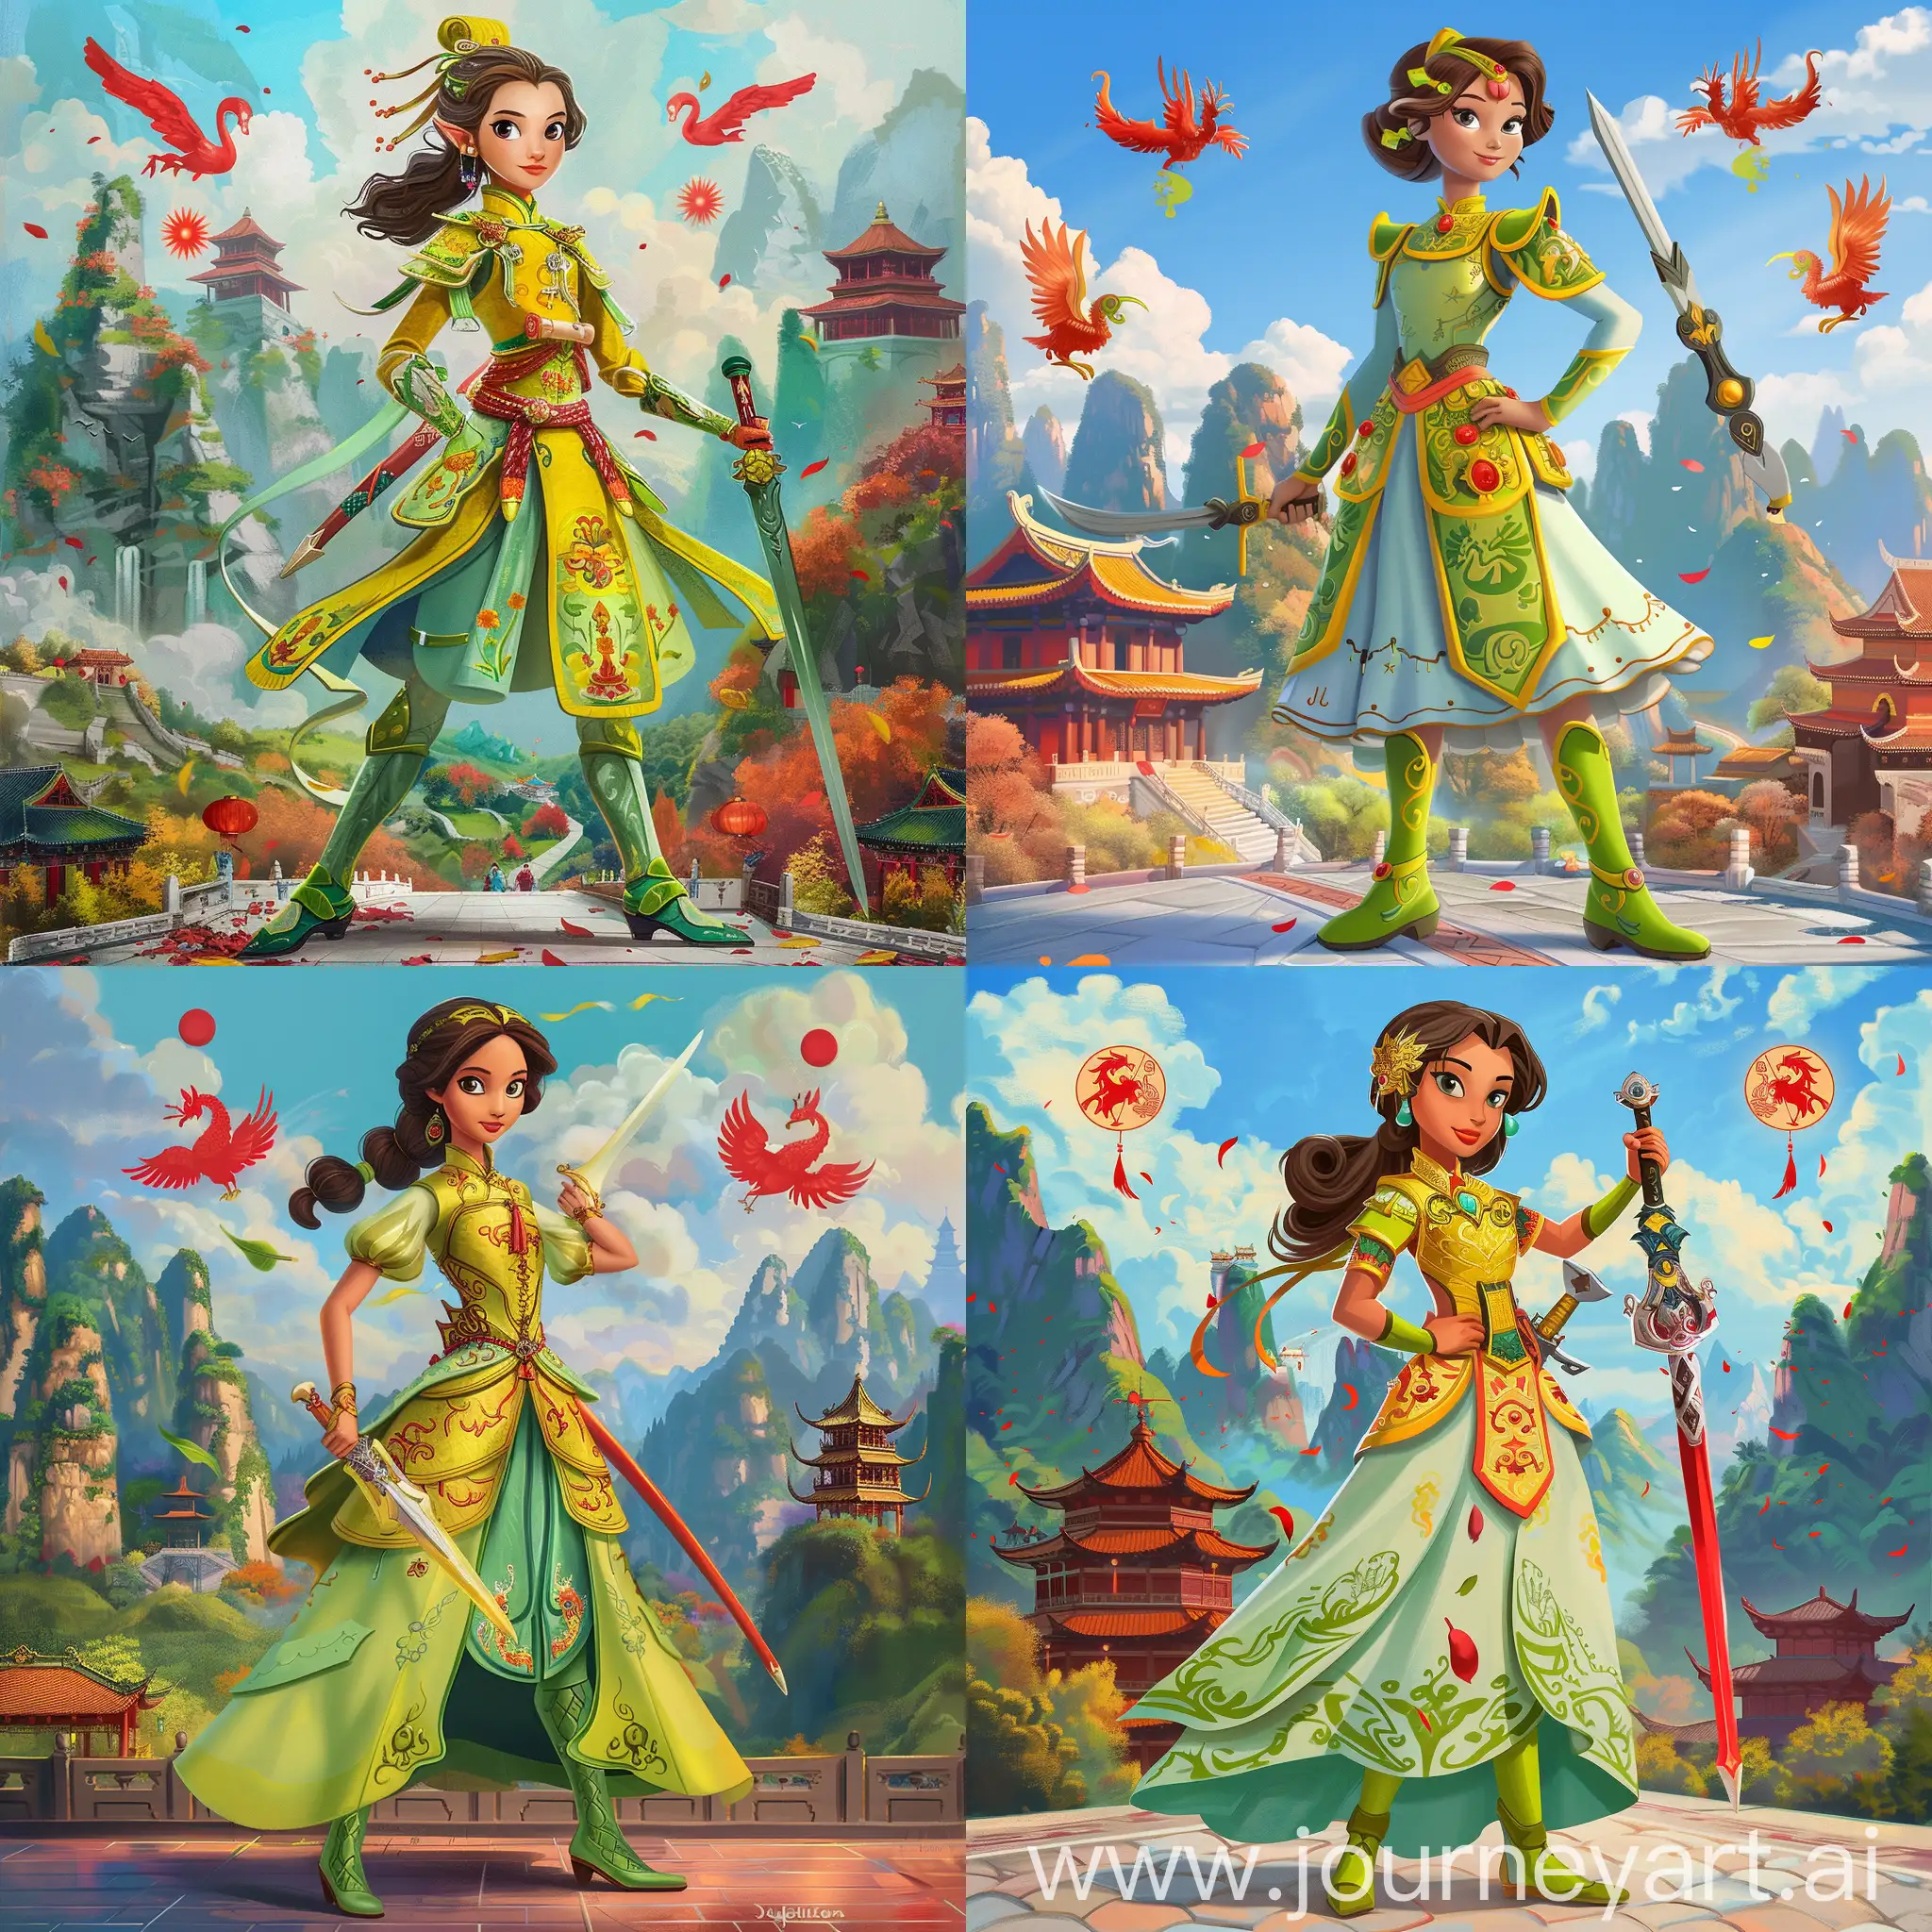 Elegant-Disney-Princess-Amber-in-Kiwi-Armor-with-Chinese-Sword-amidst-Guilin-Mountains